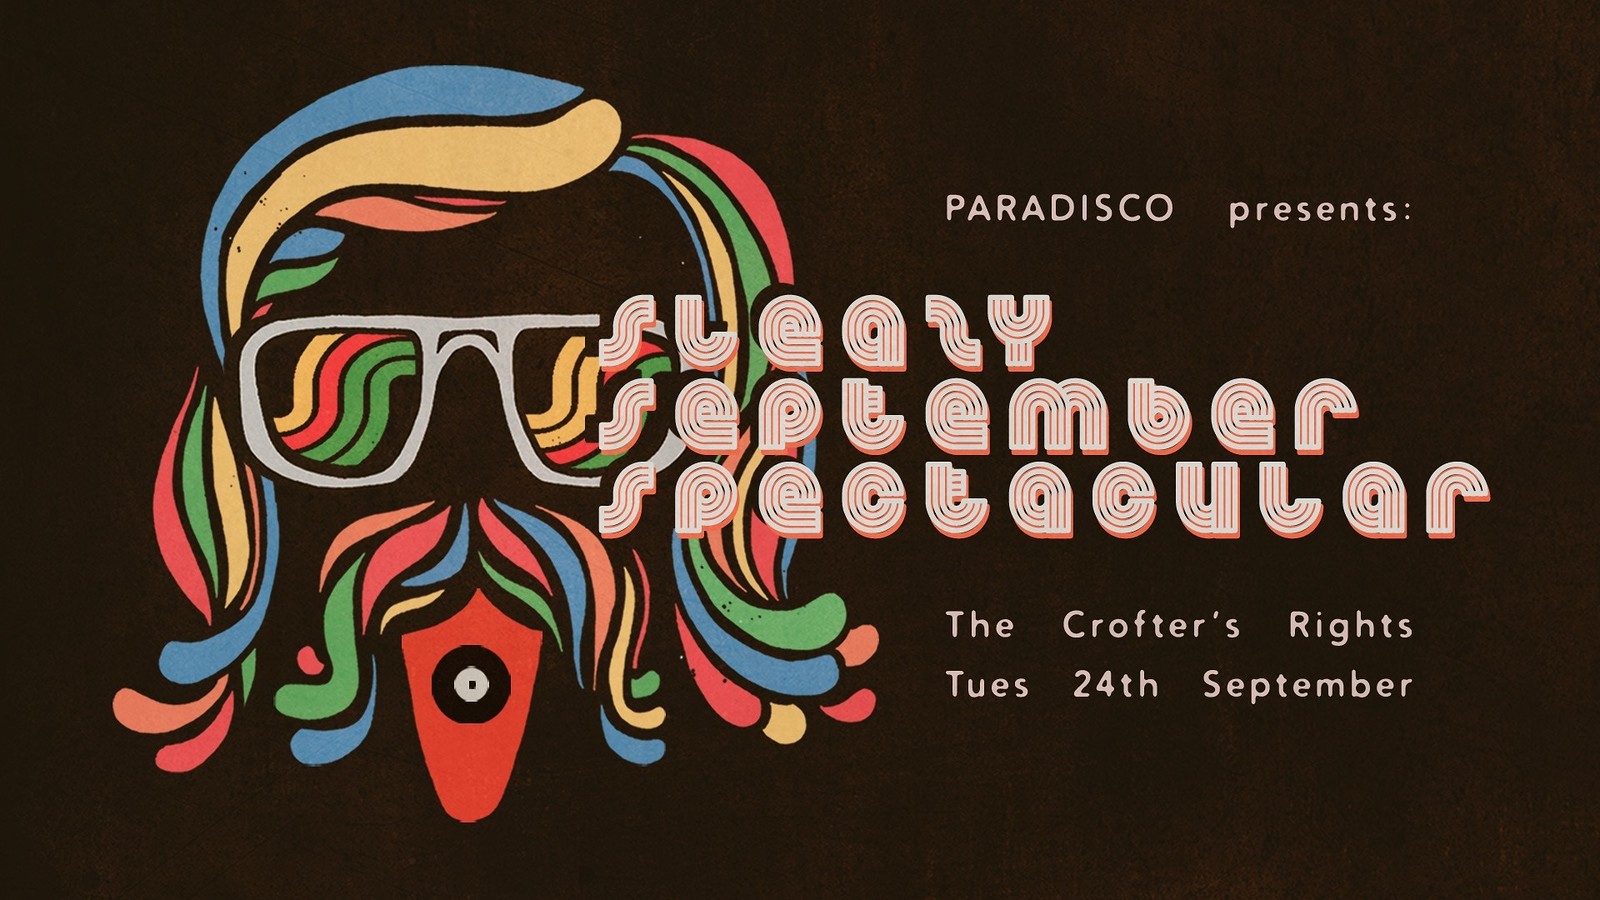 Sleazy September Spectacular / PARADISCO at Crofters Rights